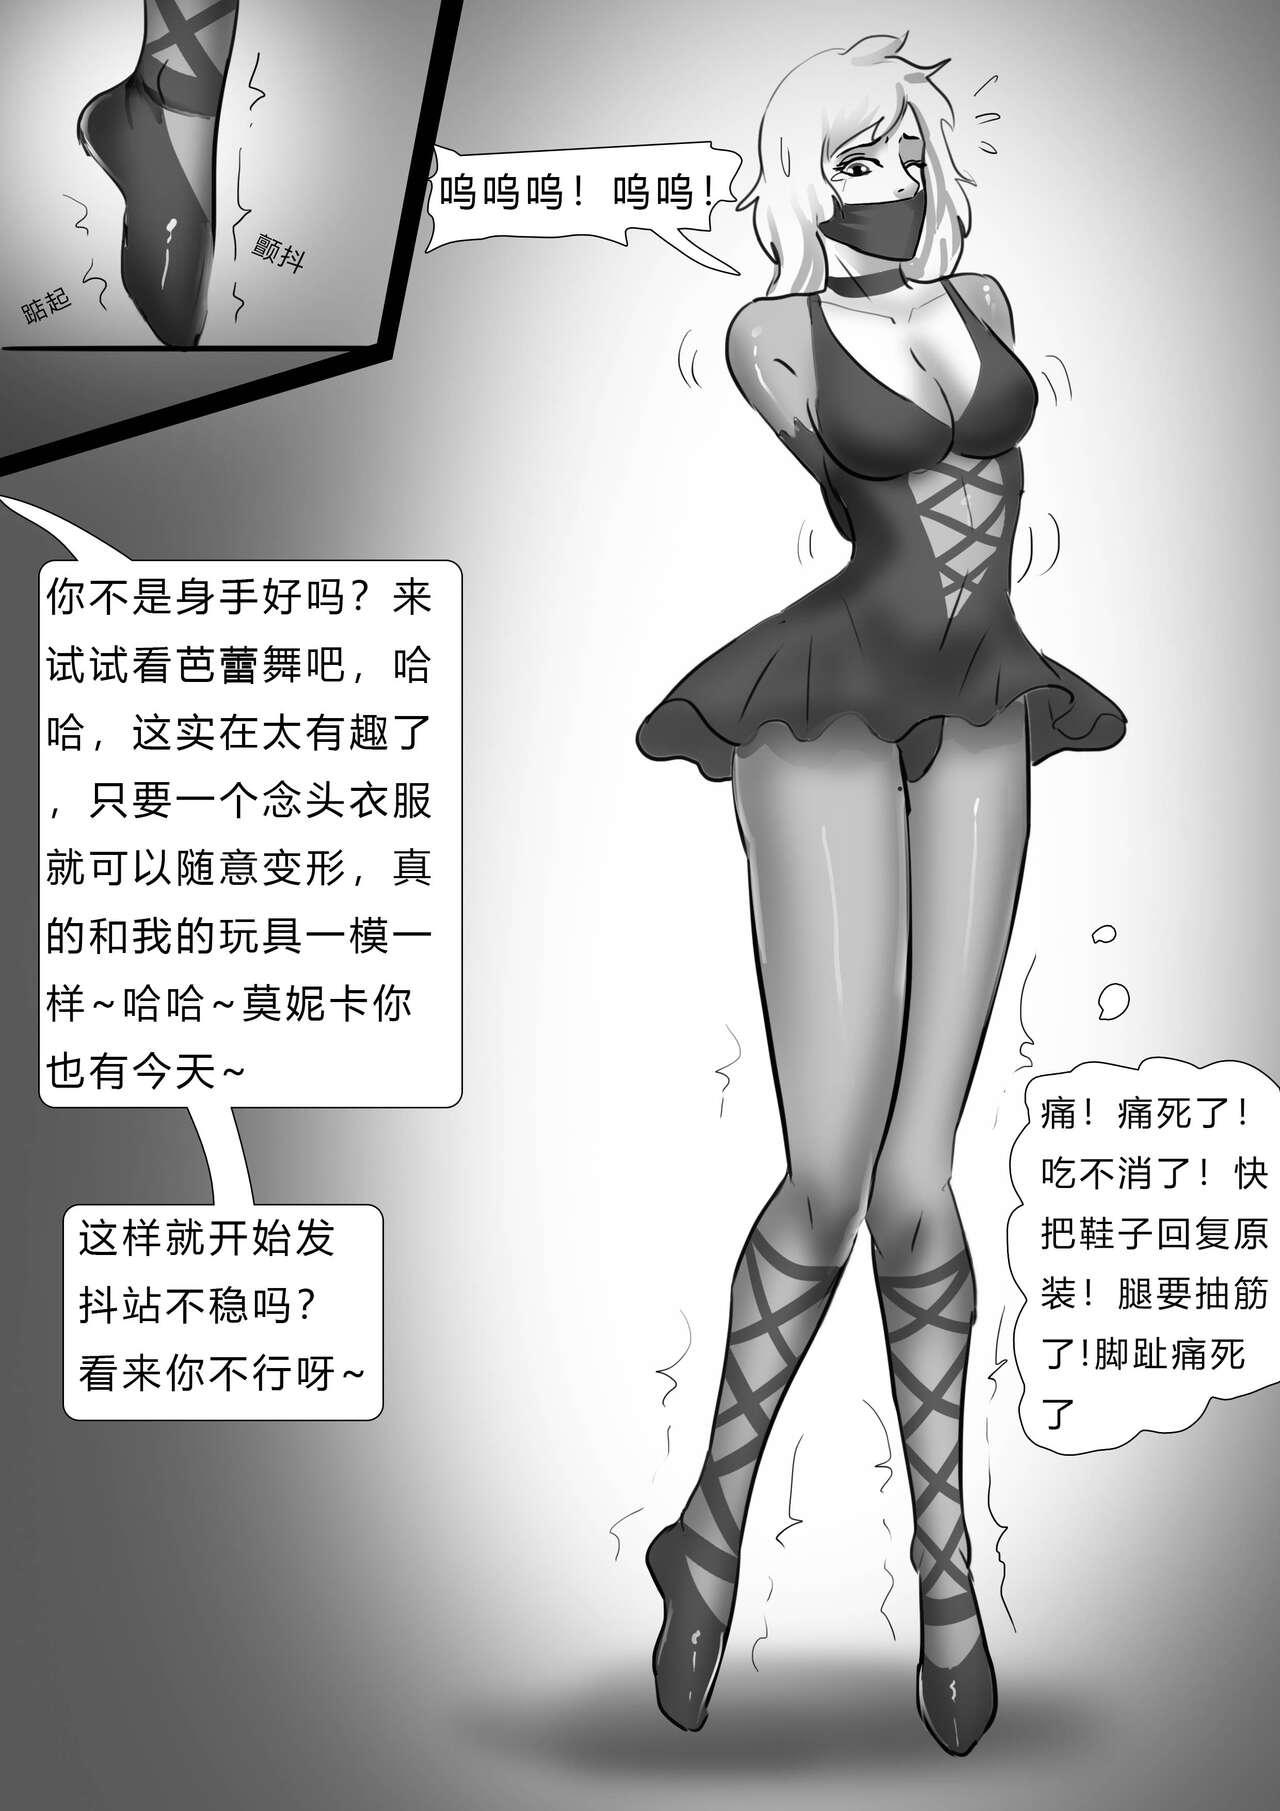 Style 千变女奴 Thousand-change slave girl Audition - Page 12